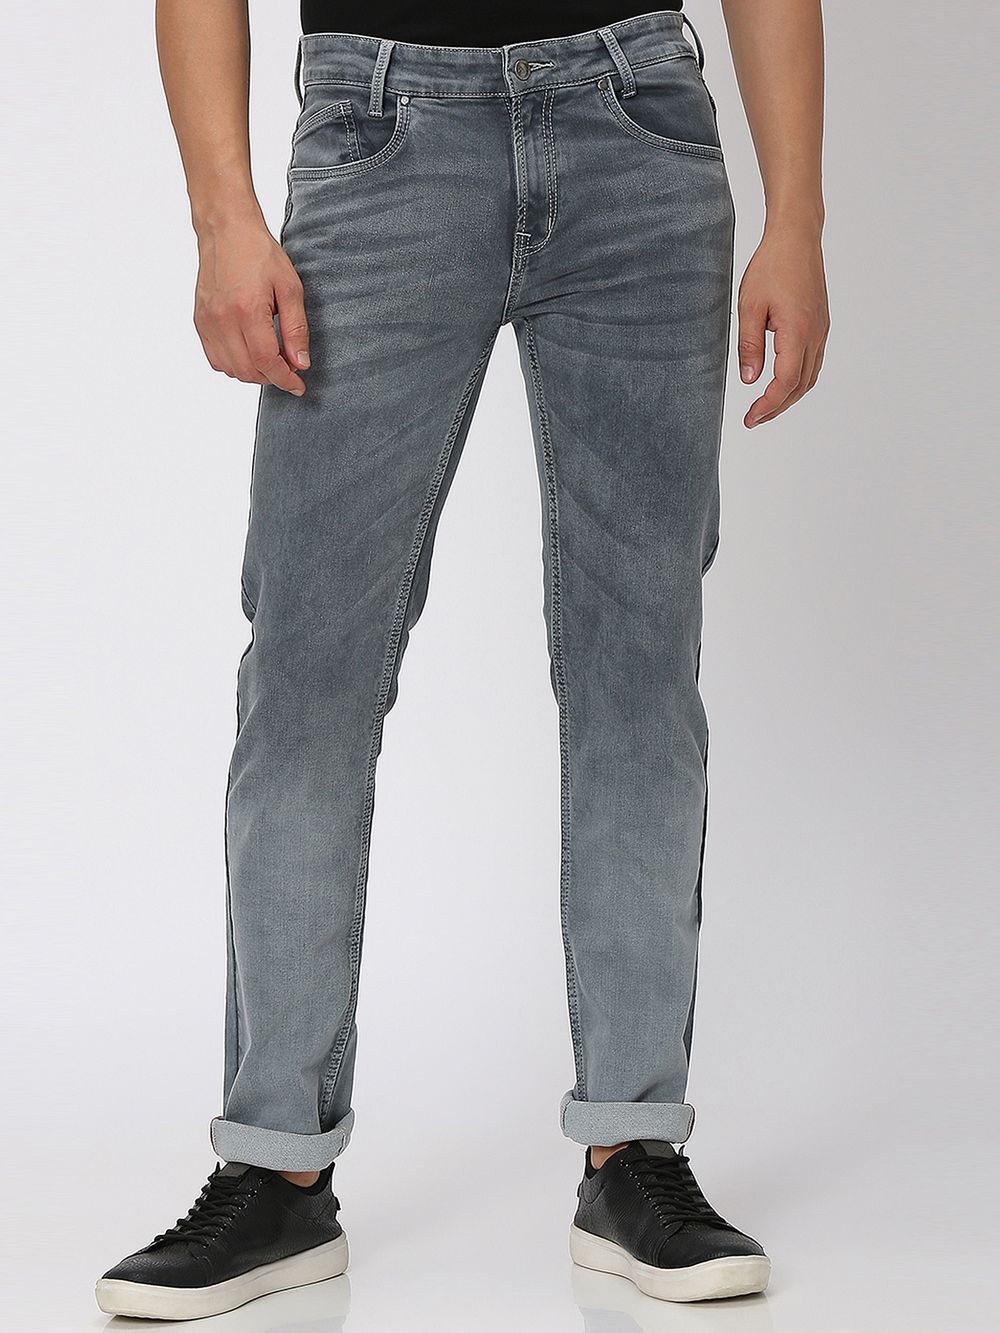 Grey Narrow Fit Denim Deluxe Stretch Jeans